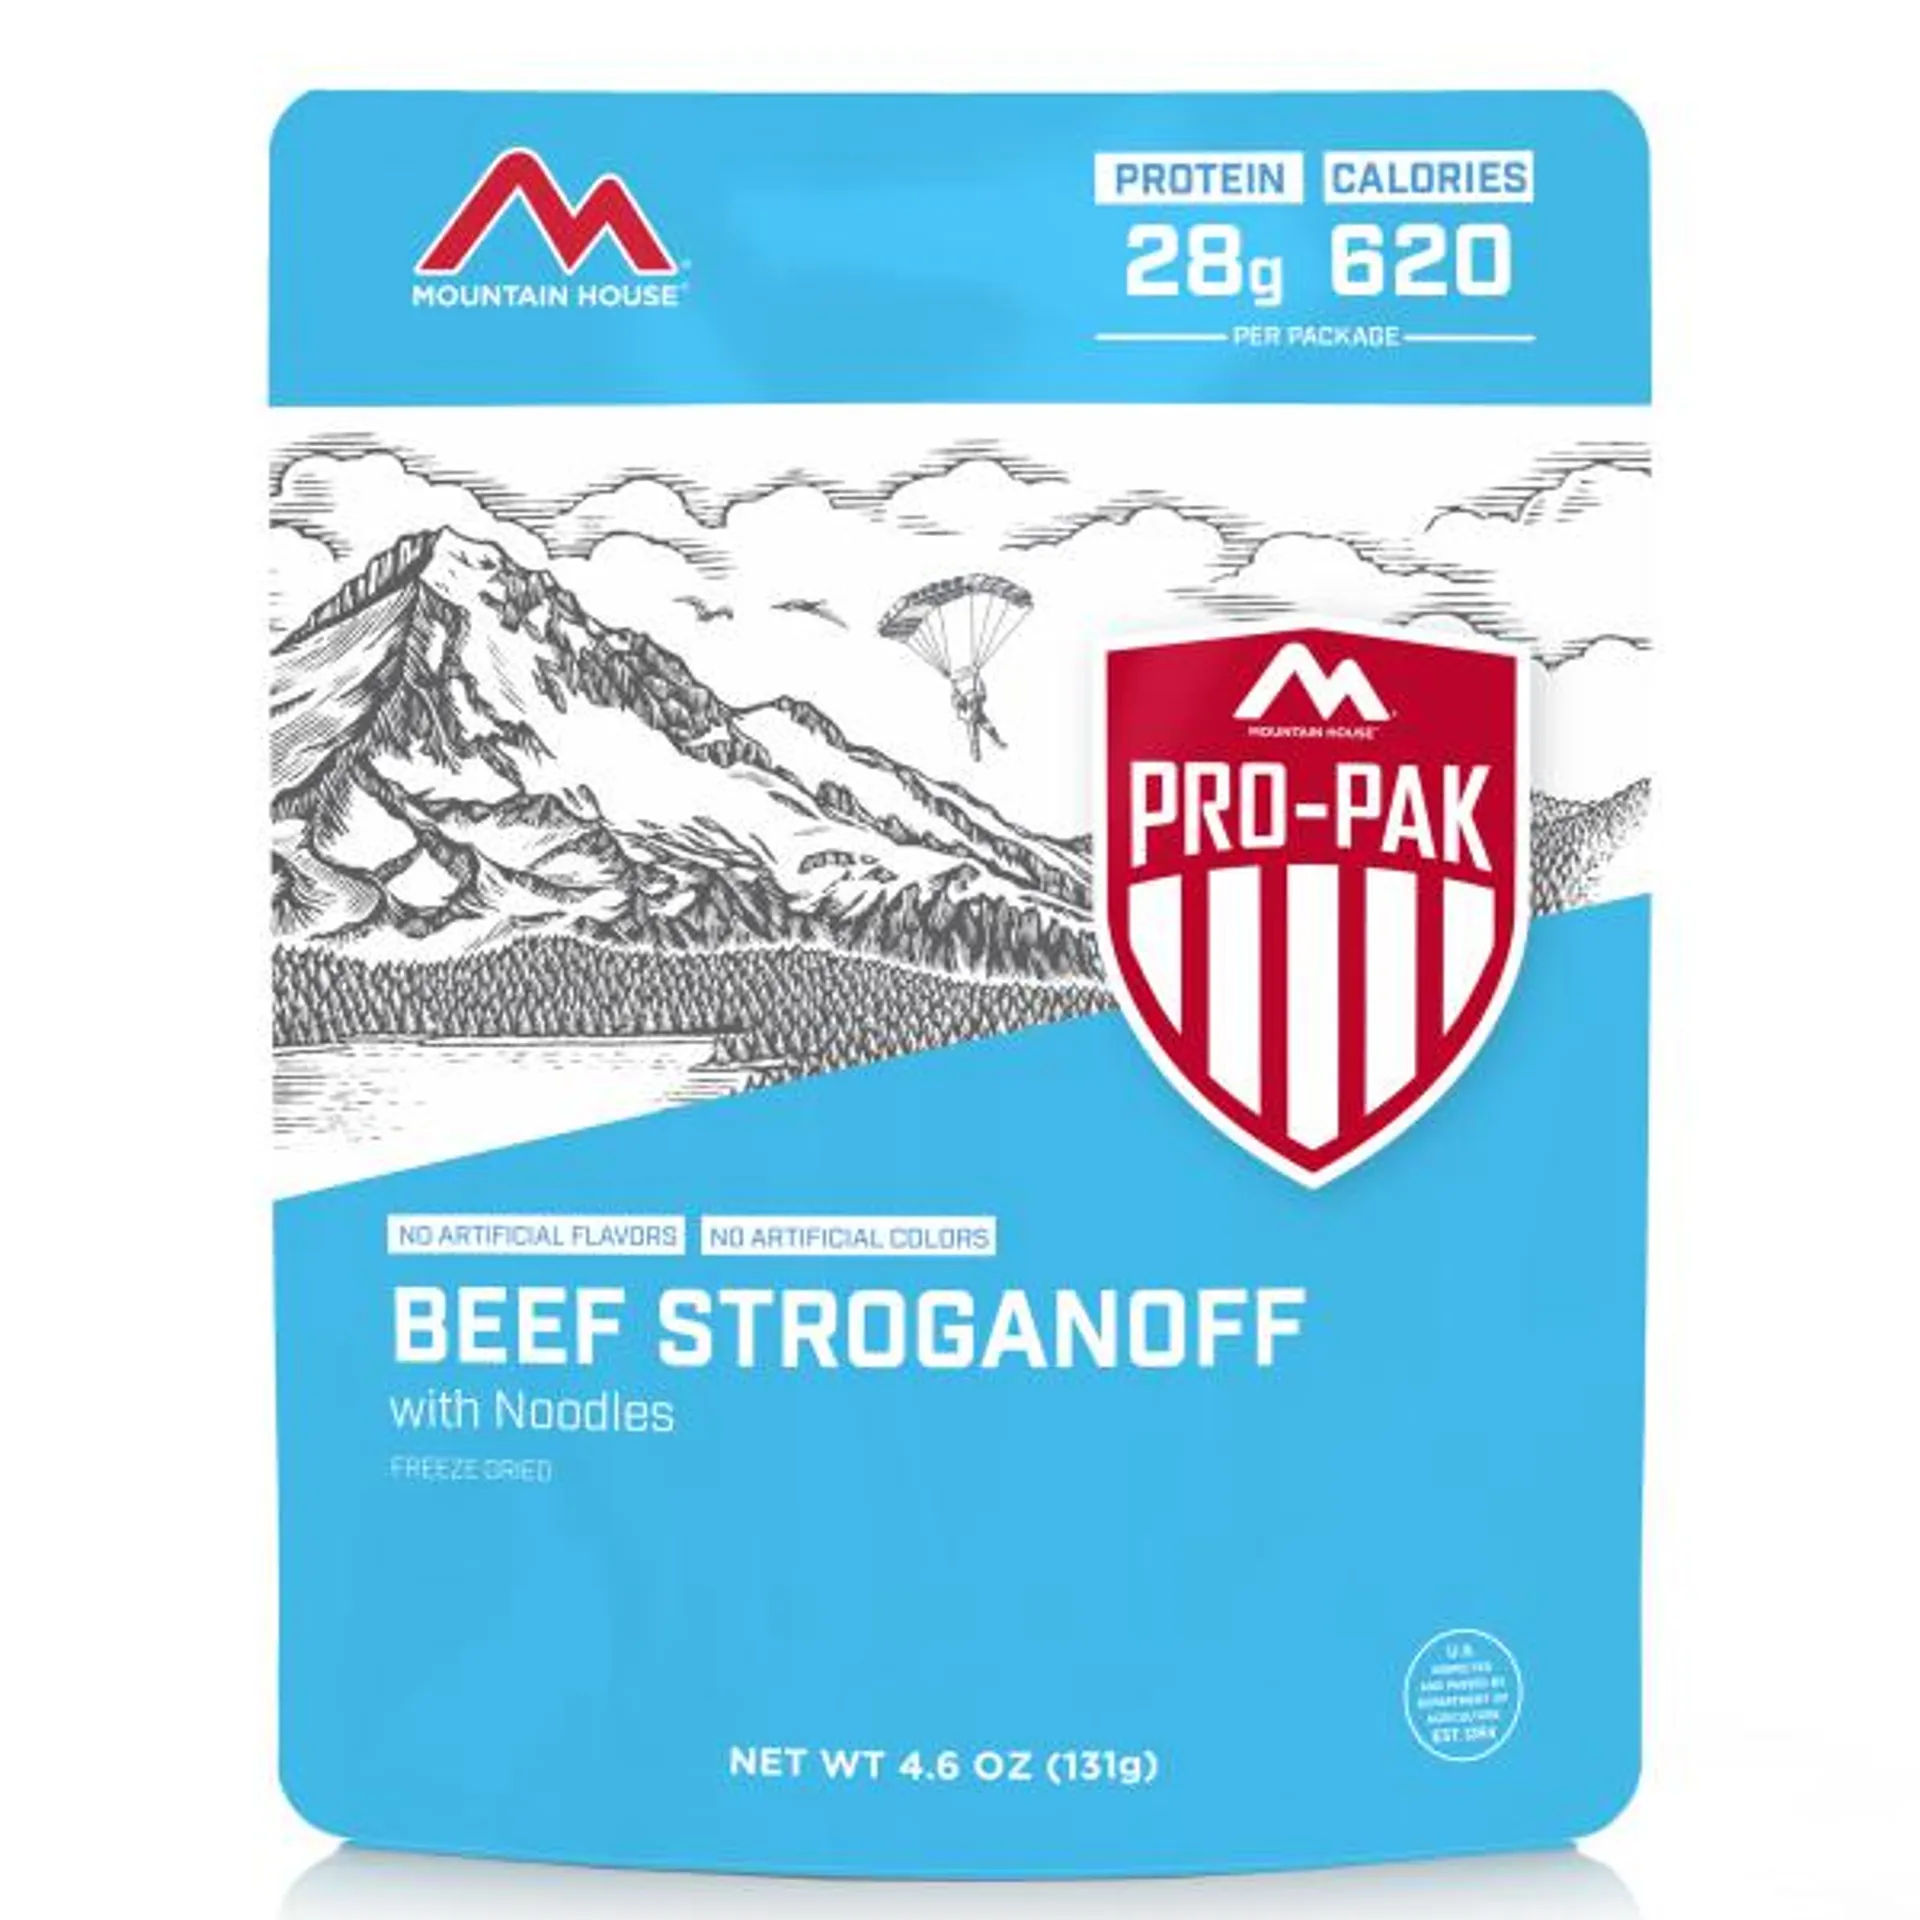 Freeze Dried Pro-Pak Beef Stroganoff with Noodles